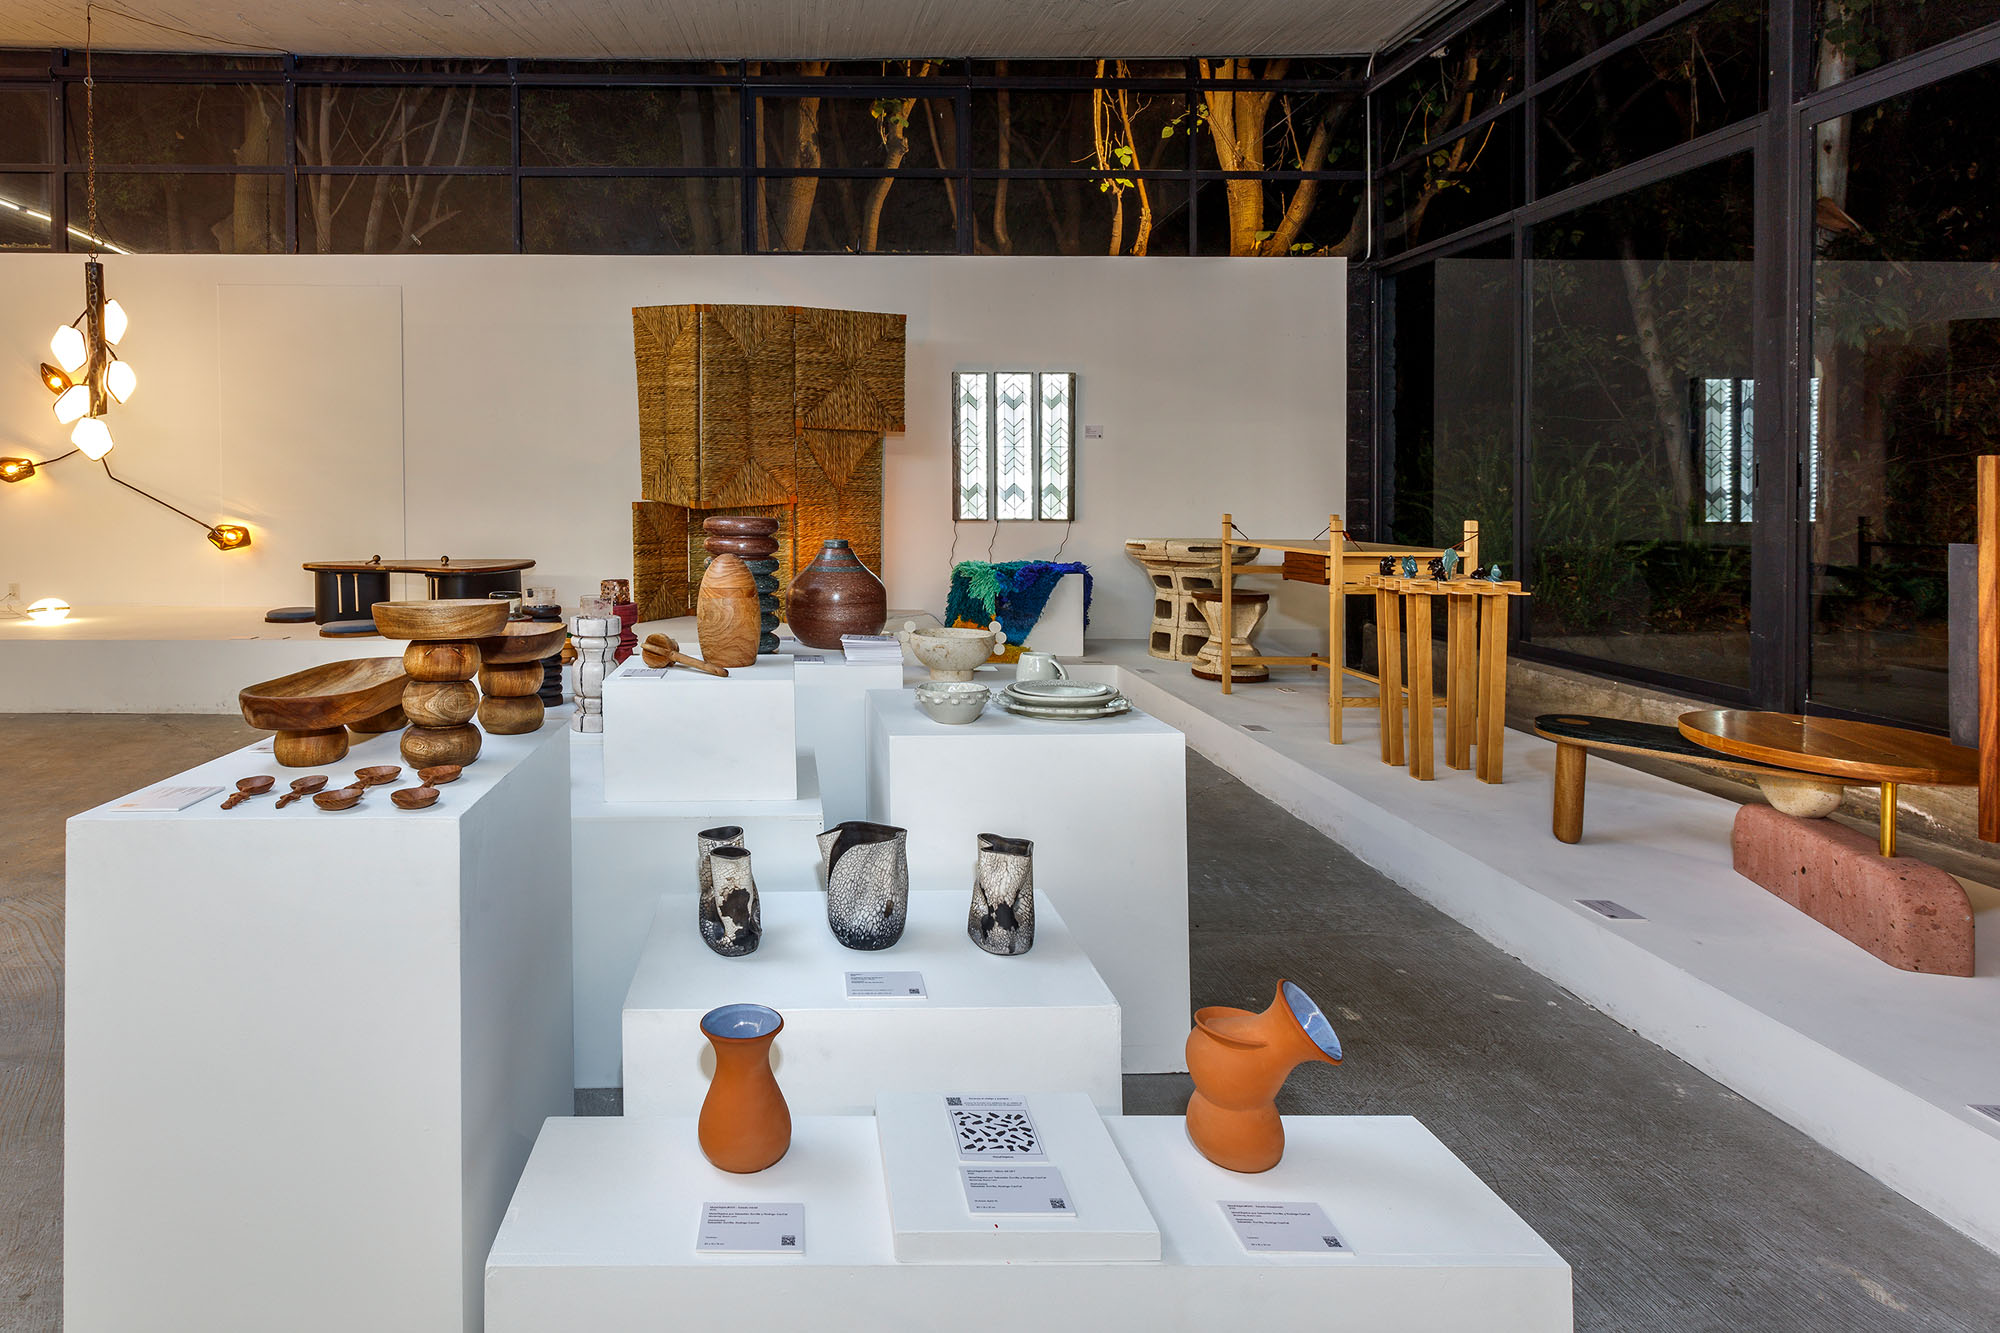 Design objects on display at Inédito in Mexico City.